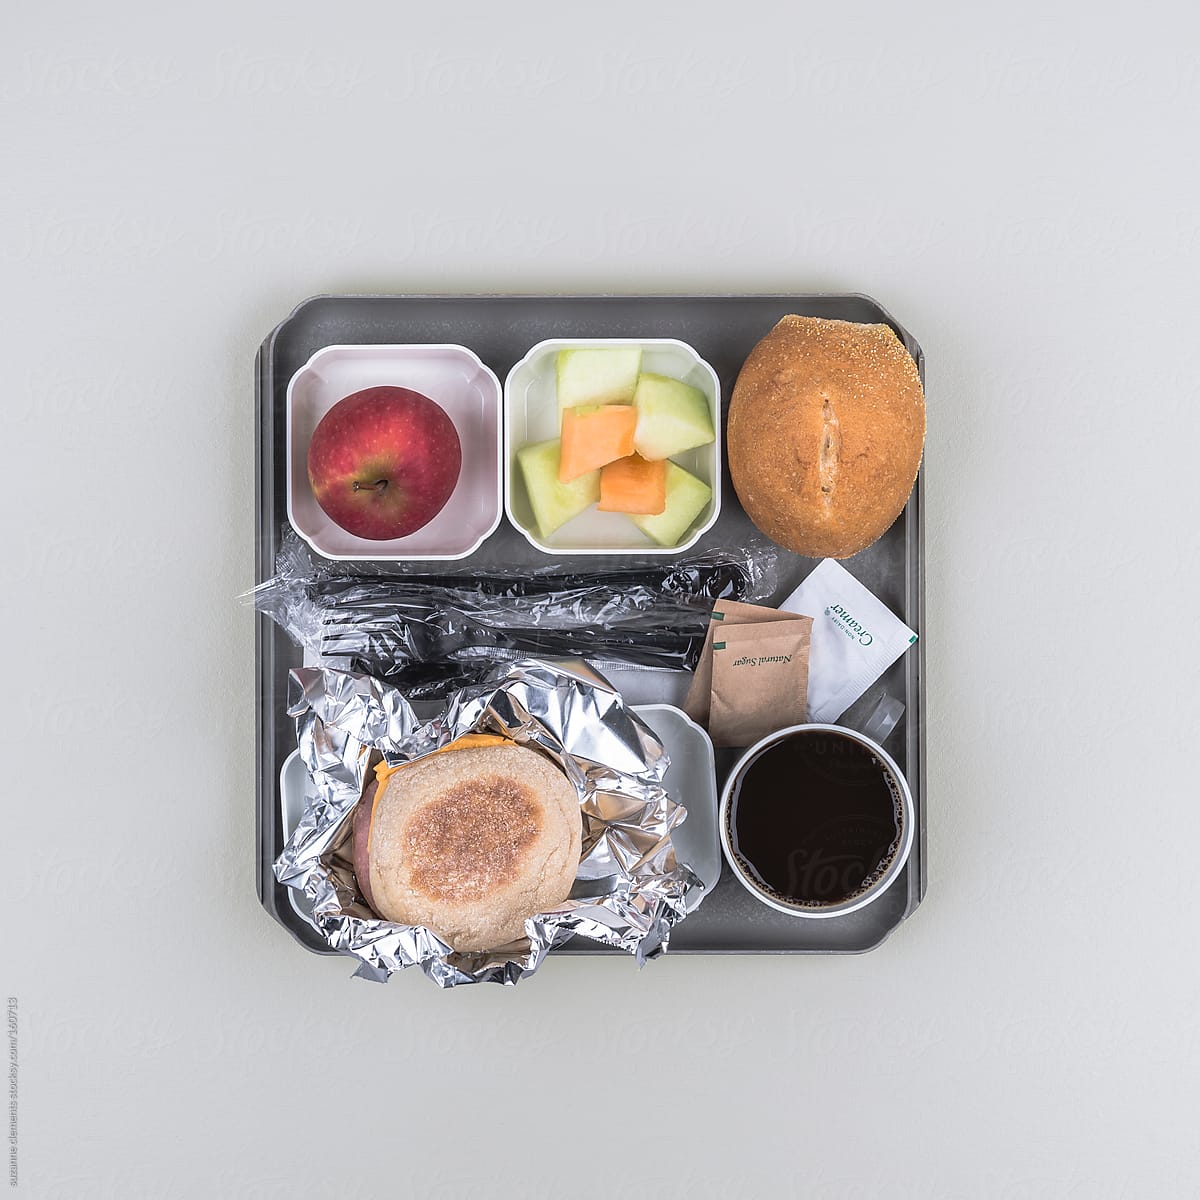 This Airline Breakfast Meal Only Looks Good When You\'re Trapped on a